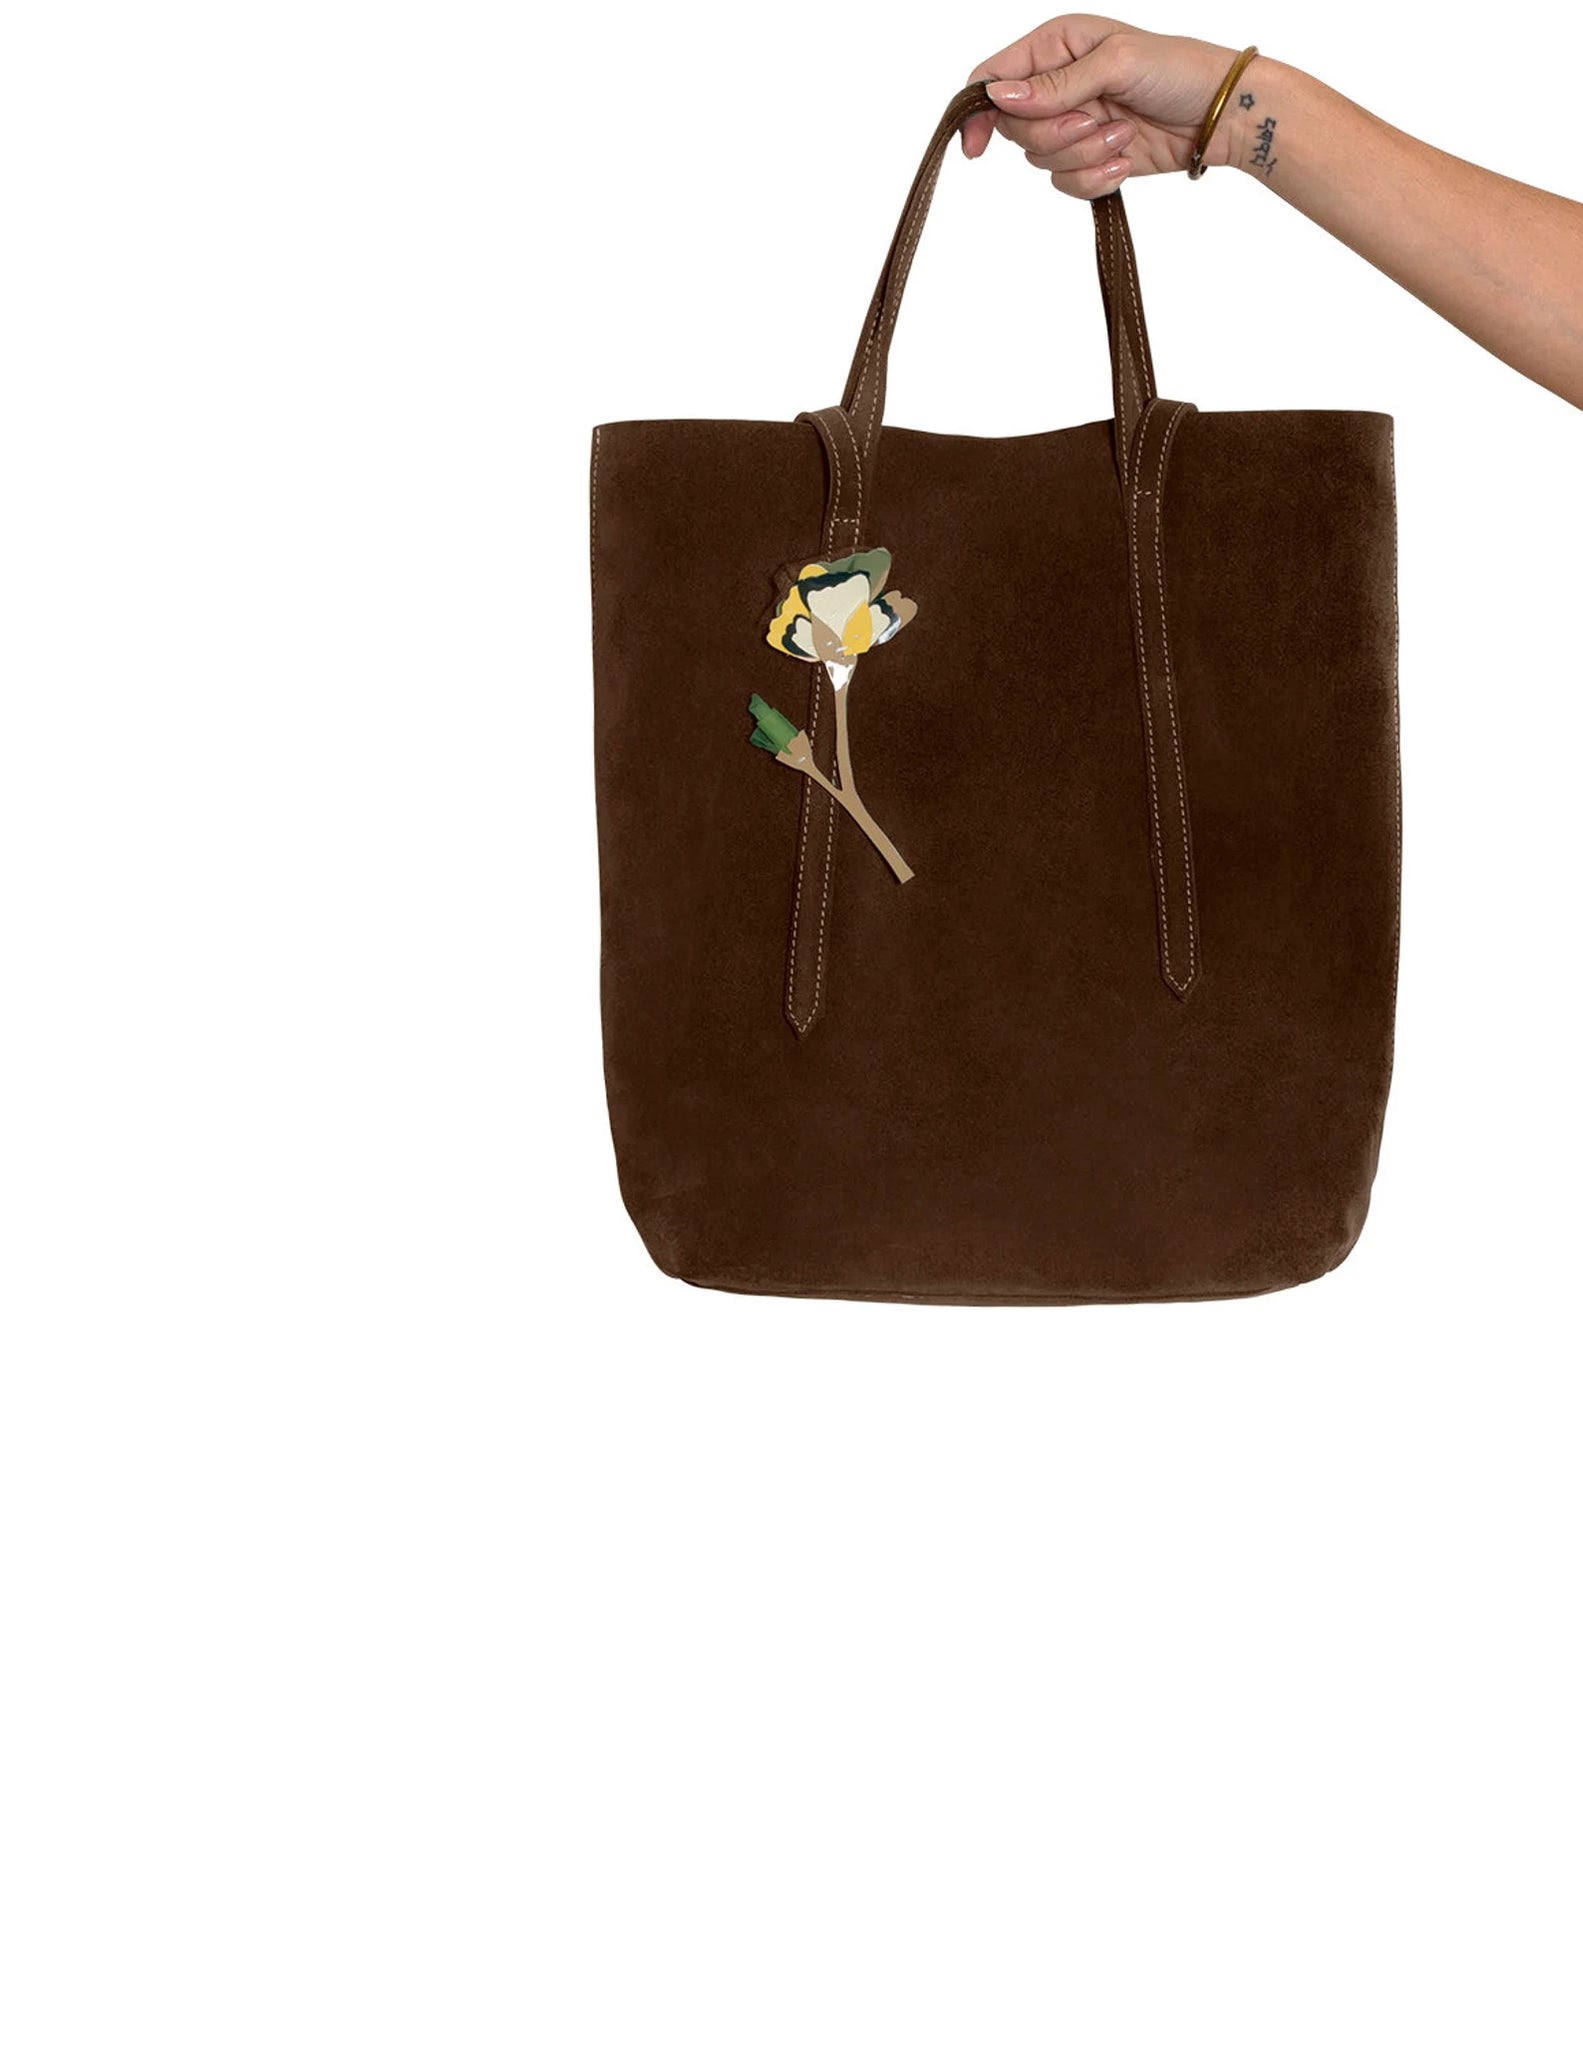 Brown suede leather tote bag